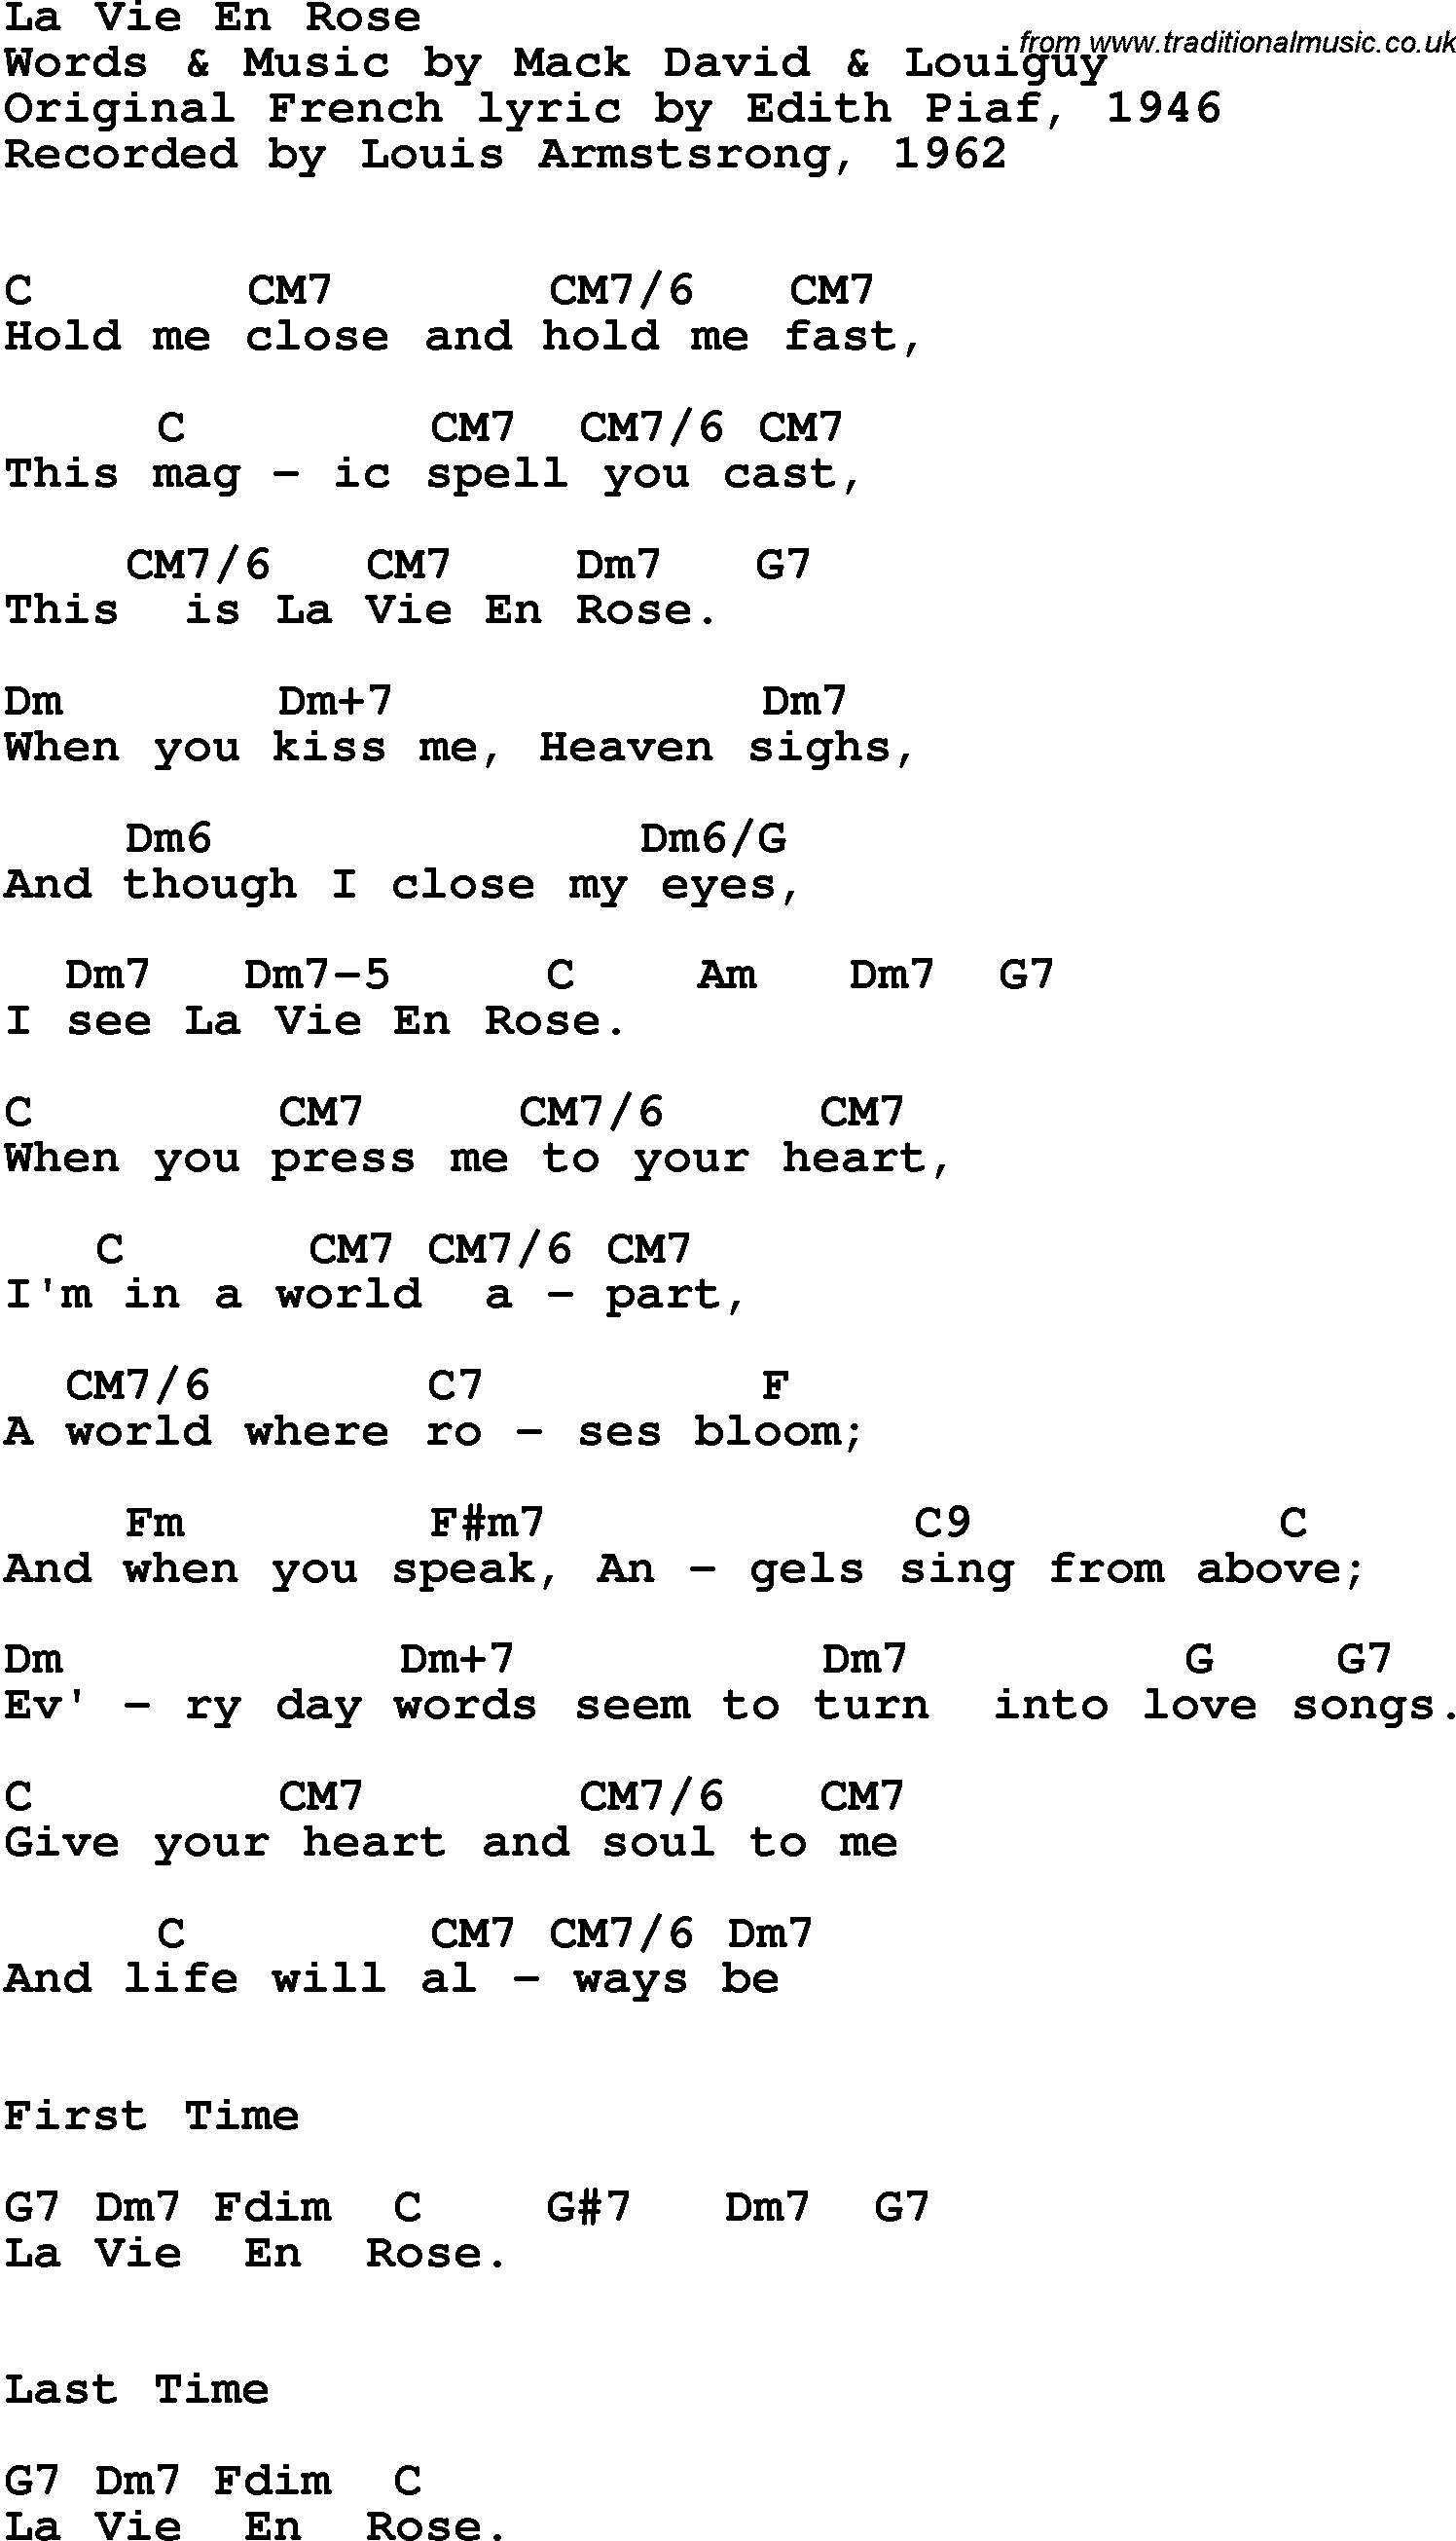 Song Lyrics with guitar chords for La Vie En Rose - Louis Armstrong, 1962